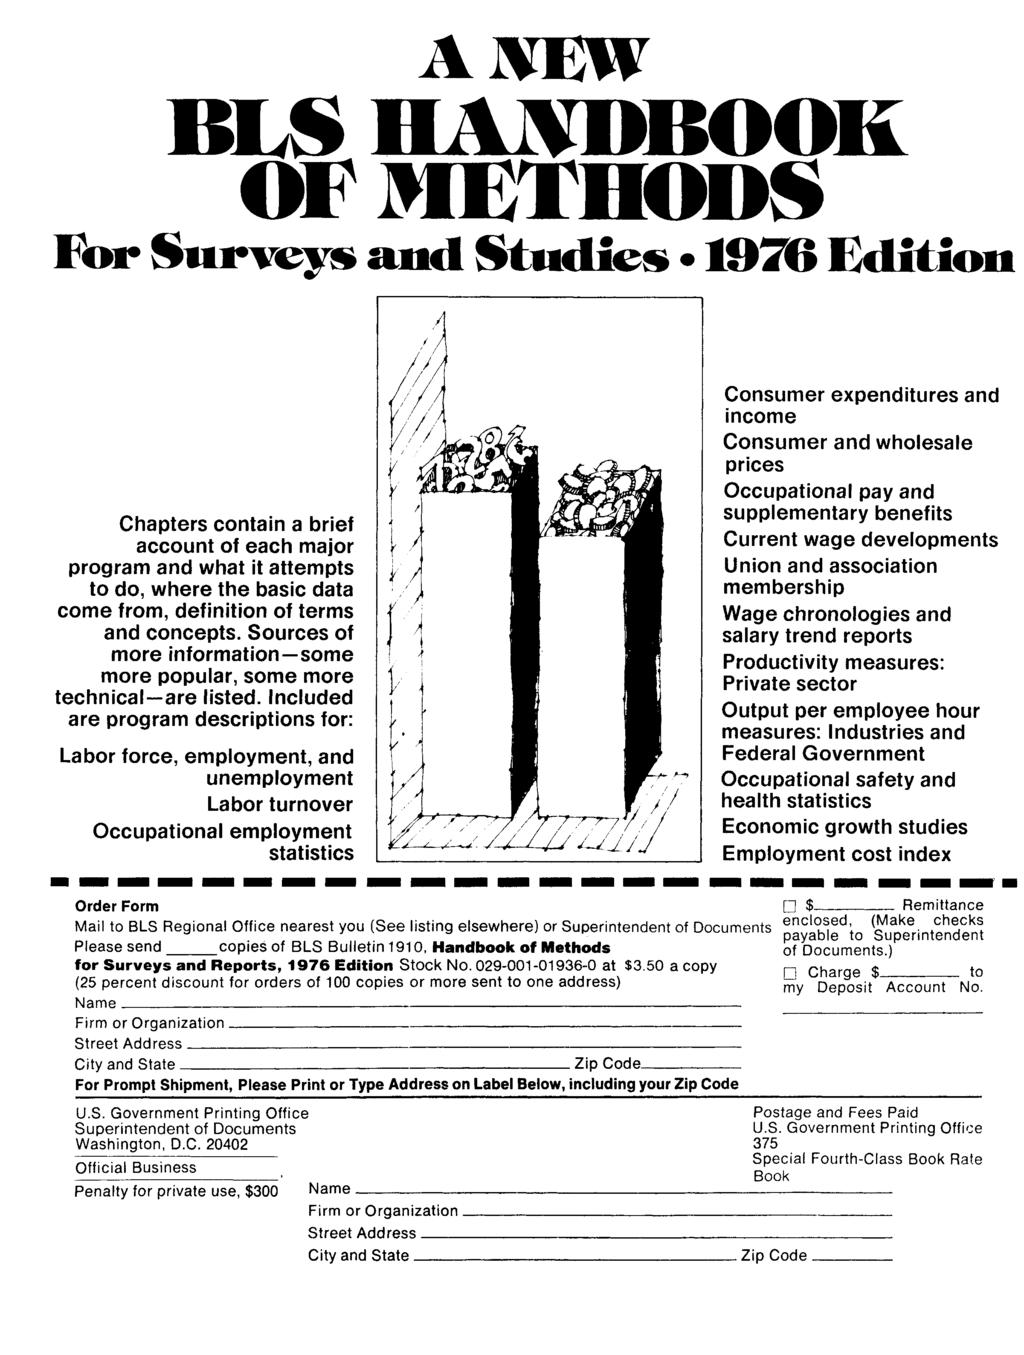 AJVEW B LS HAJVUBOOIi OF METHODS ibr Surveys and Studies 1920 Edition Chapters contain a brief account of each major program and what it attempts to do, where the basic data come from, definition of